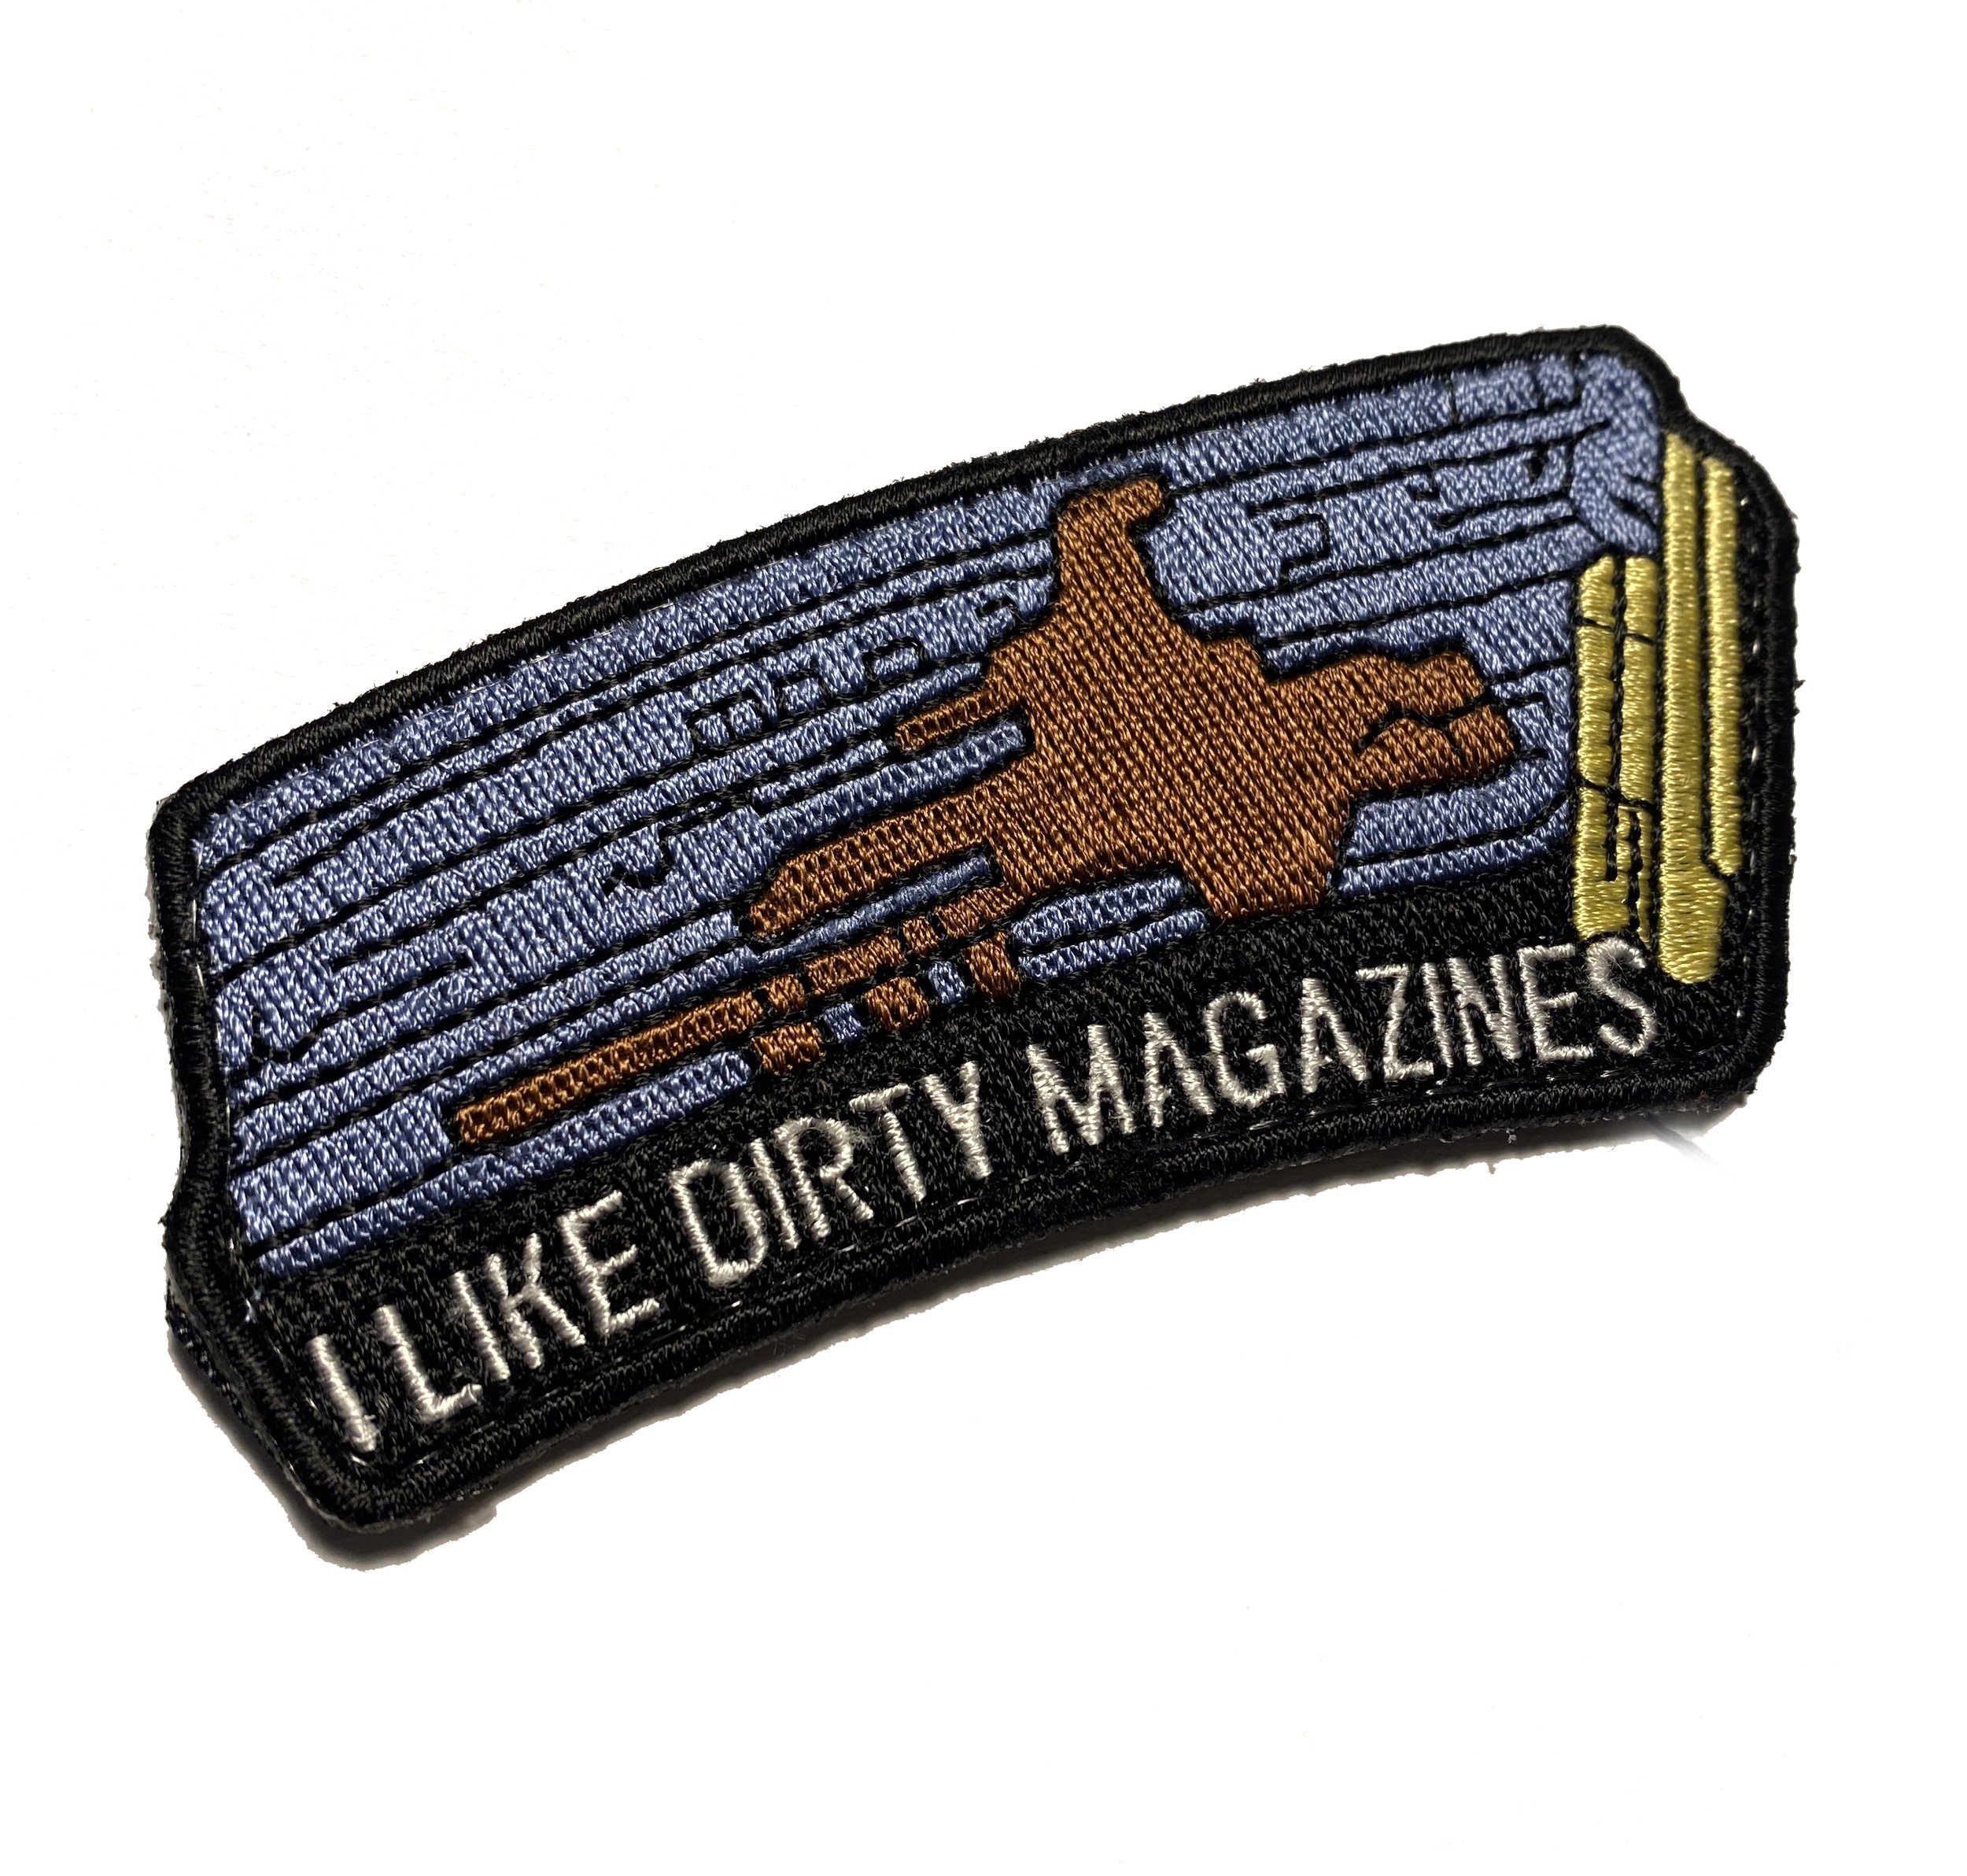 yeet blackout subdued tactical army morale funny hook&loop patch 